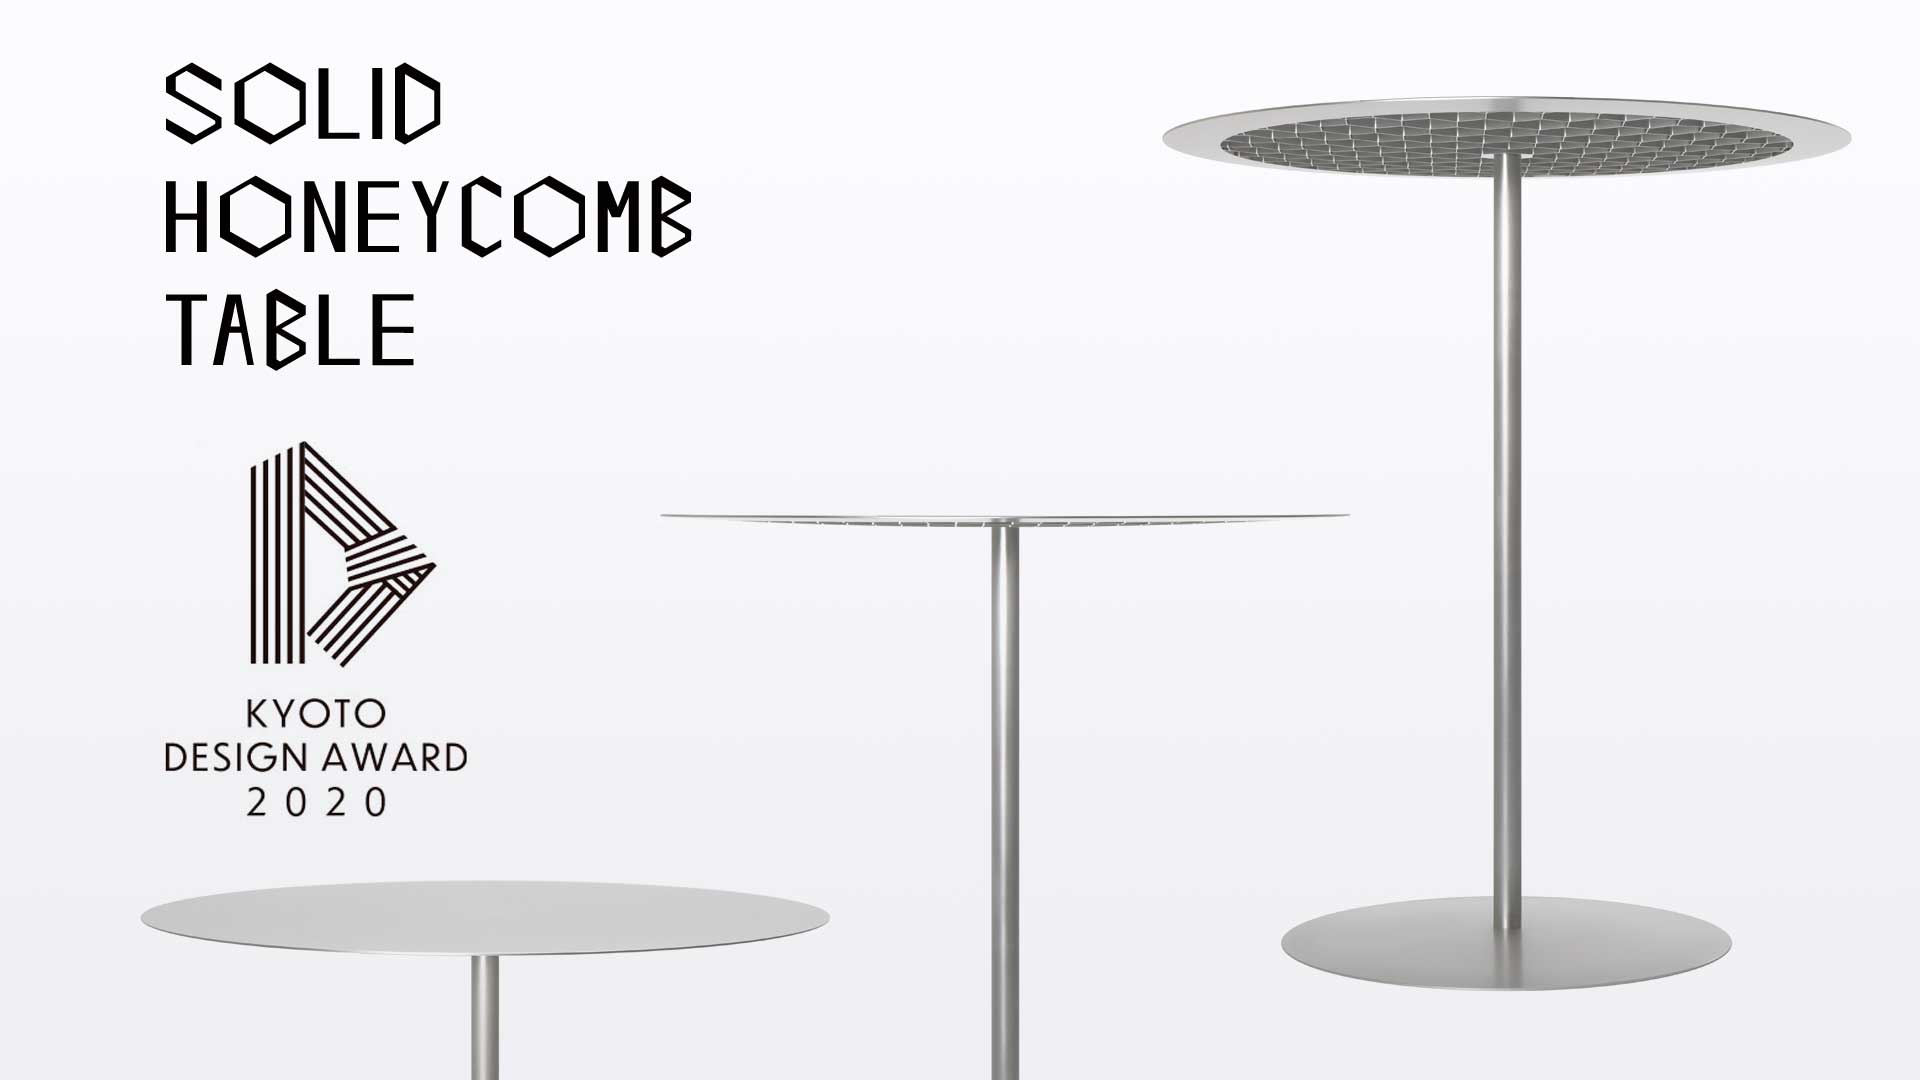 Solid Honeycomb Table